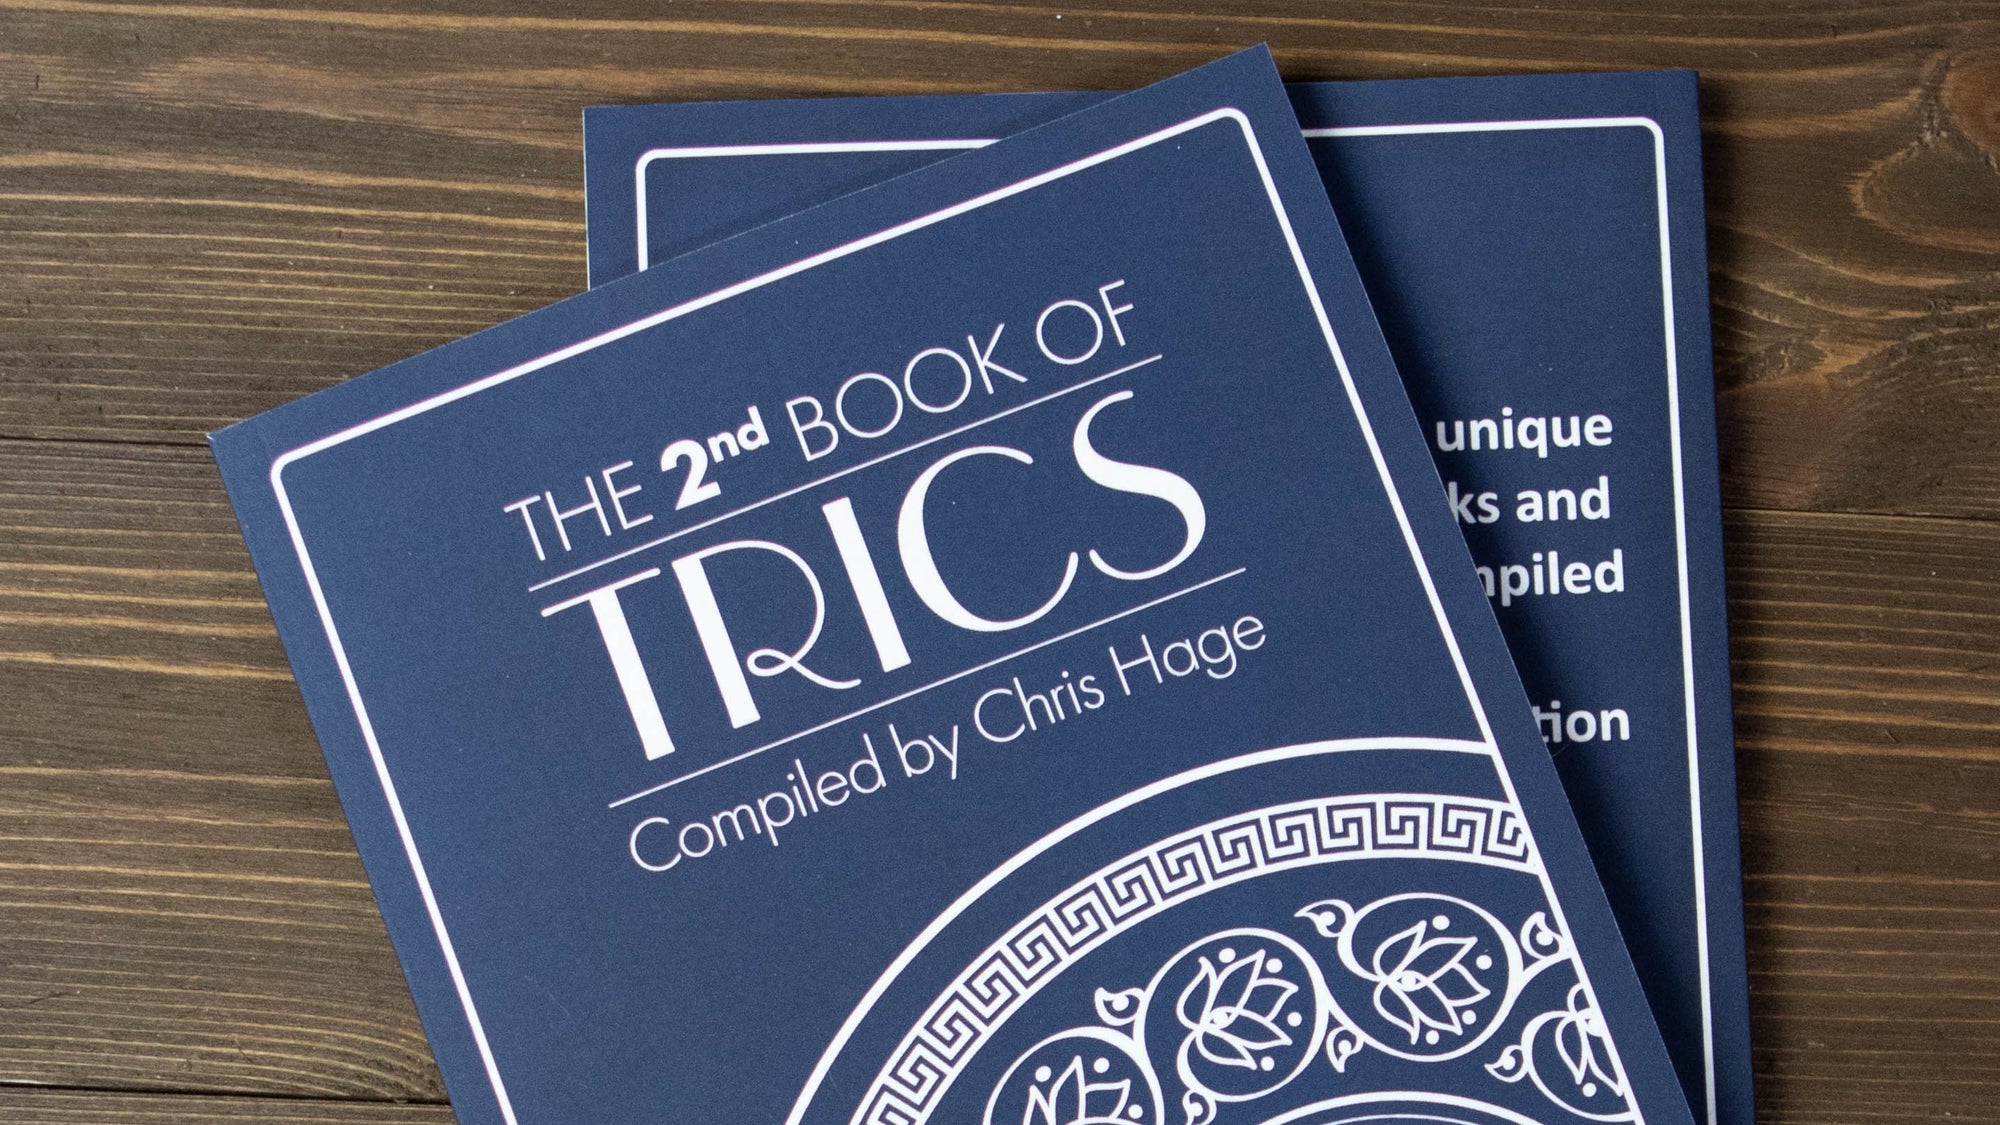 The 2nd Book of TRICS